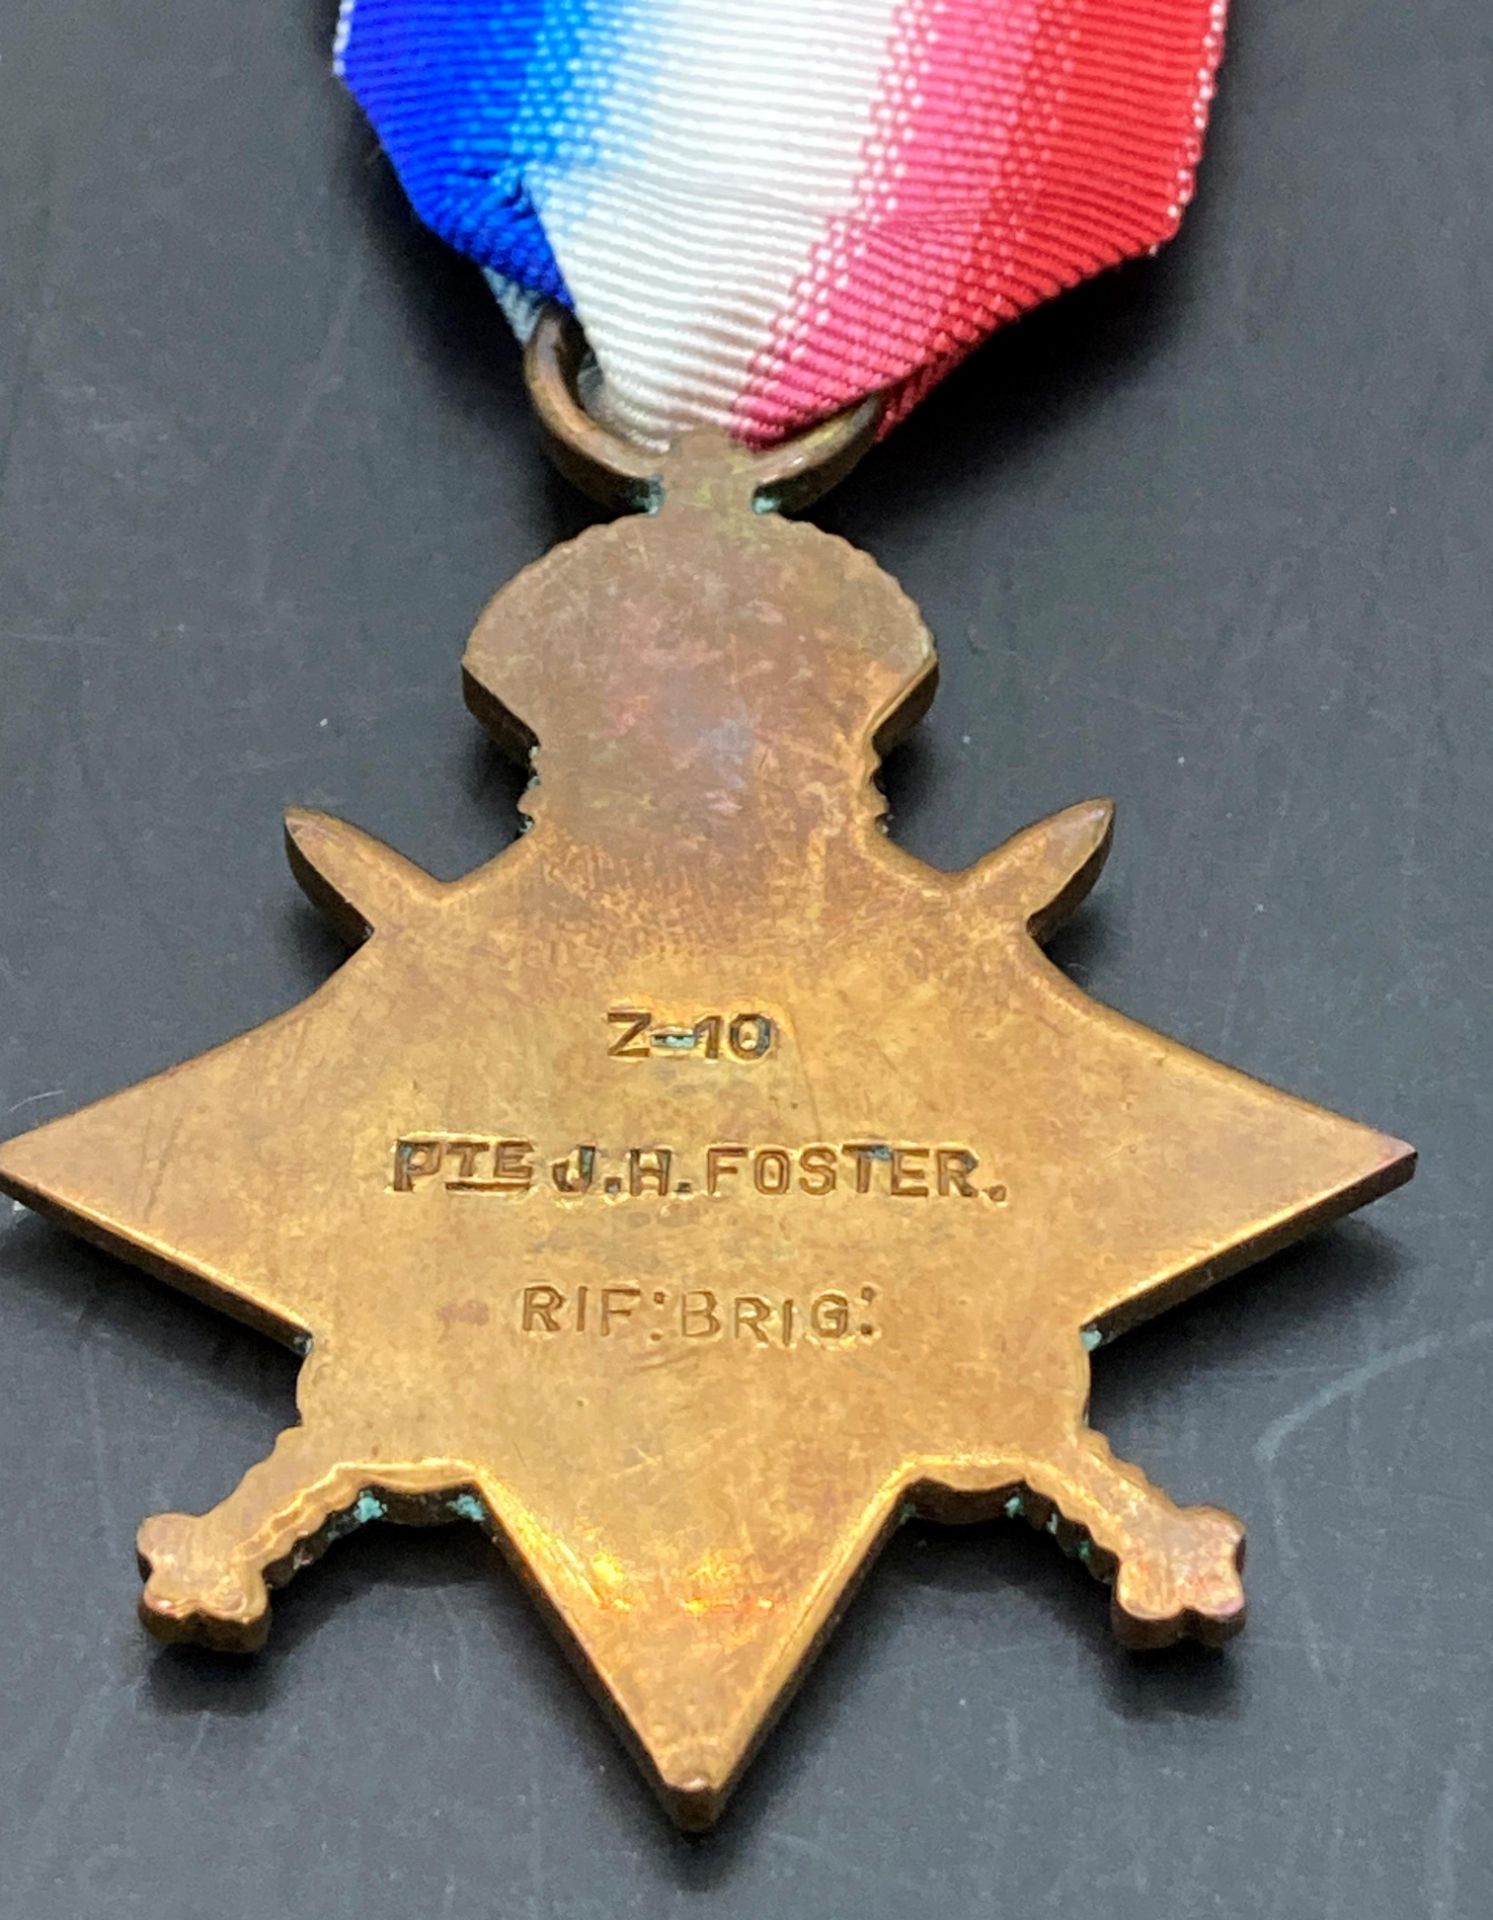 1914-1915 Star with ribbon to 2-10 Pte J H Foster Rif Brig killed in action 9/5/1915 from Barby, - Image 2 of 3